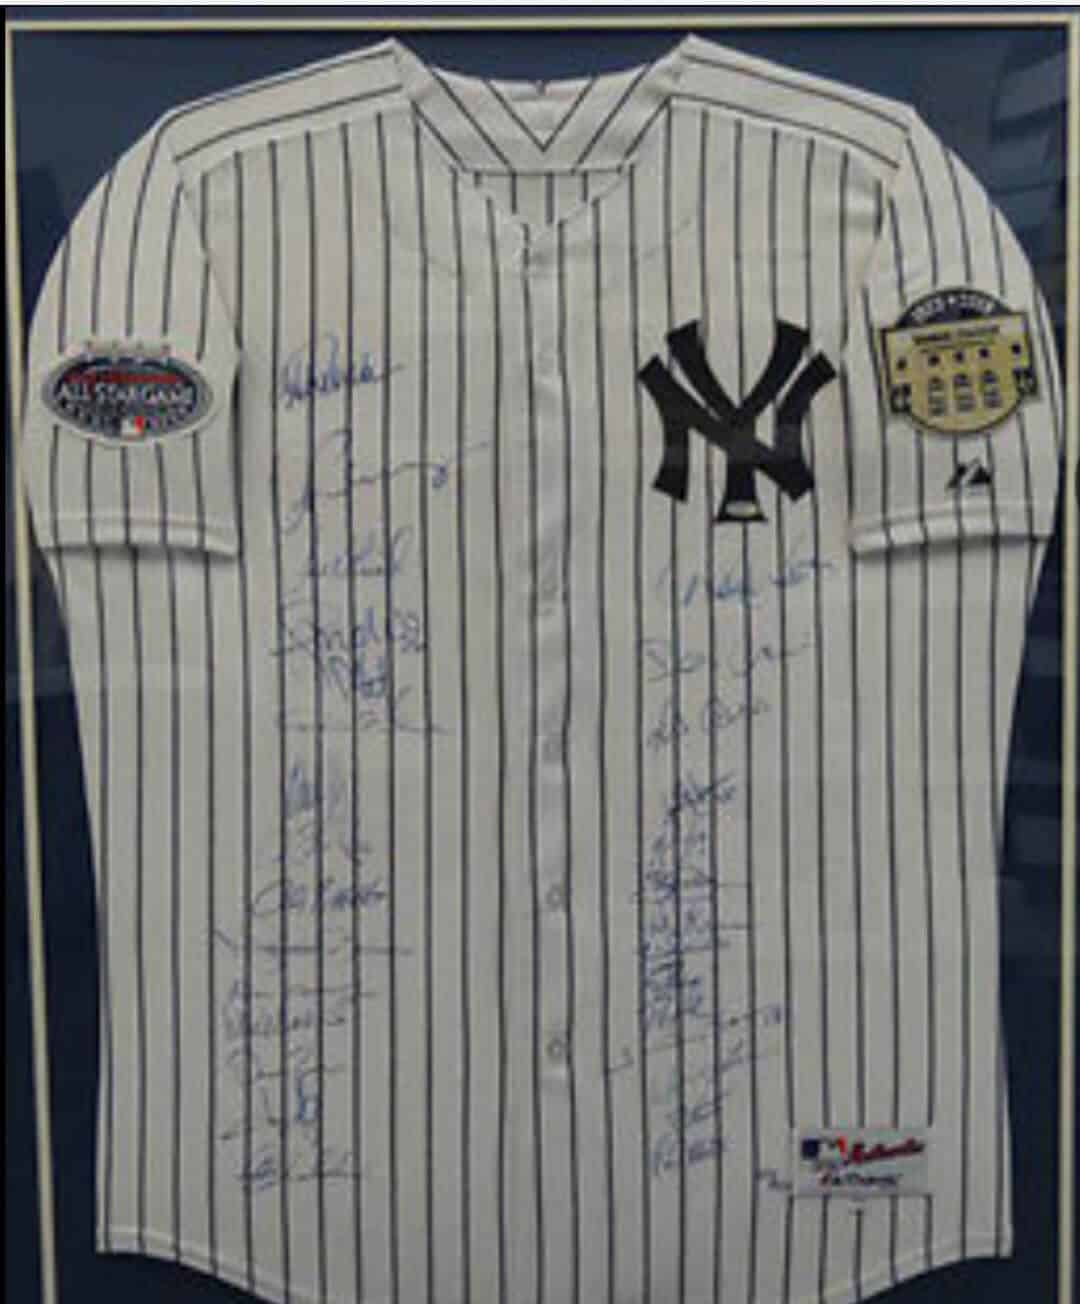 2007 NY Yankees Team signed Autographed Jersey Authenticated